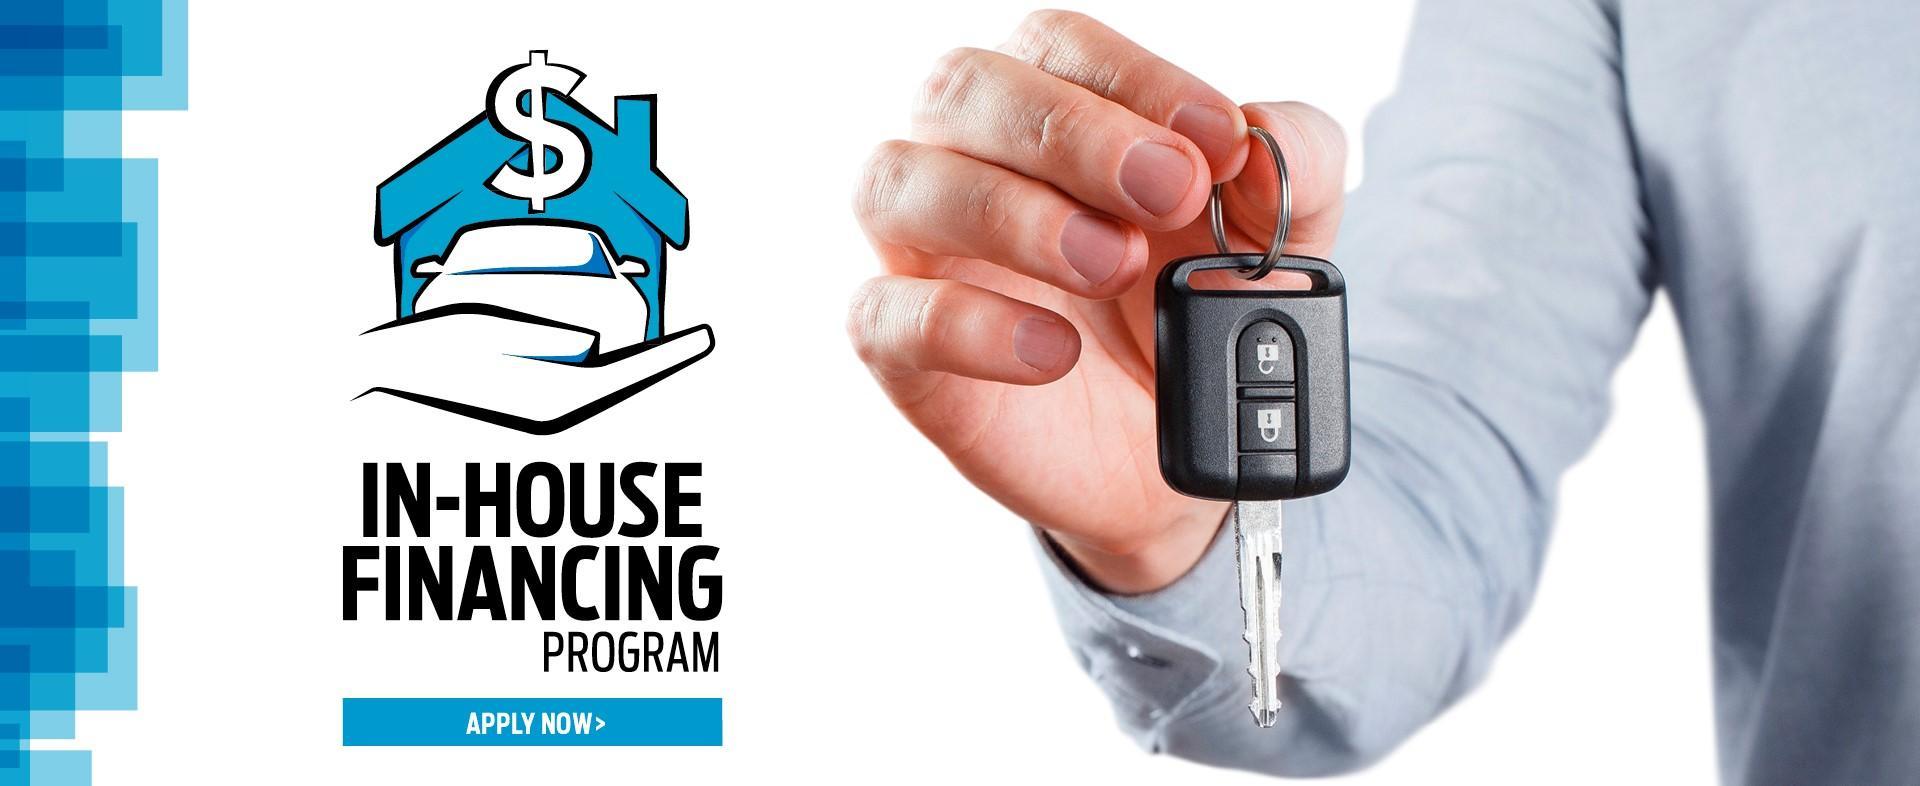 In-House Financing